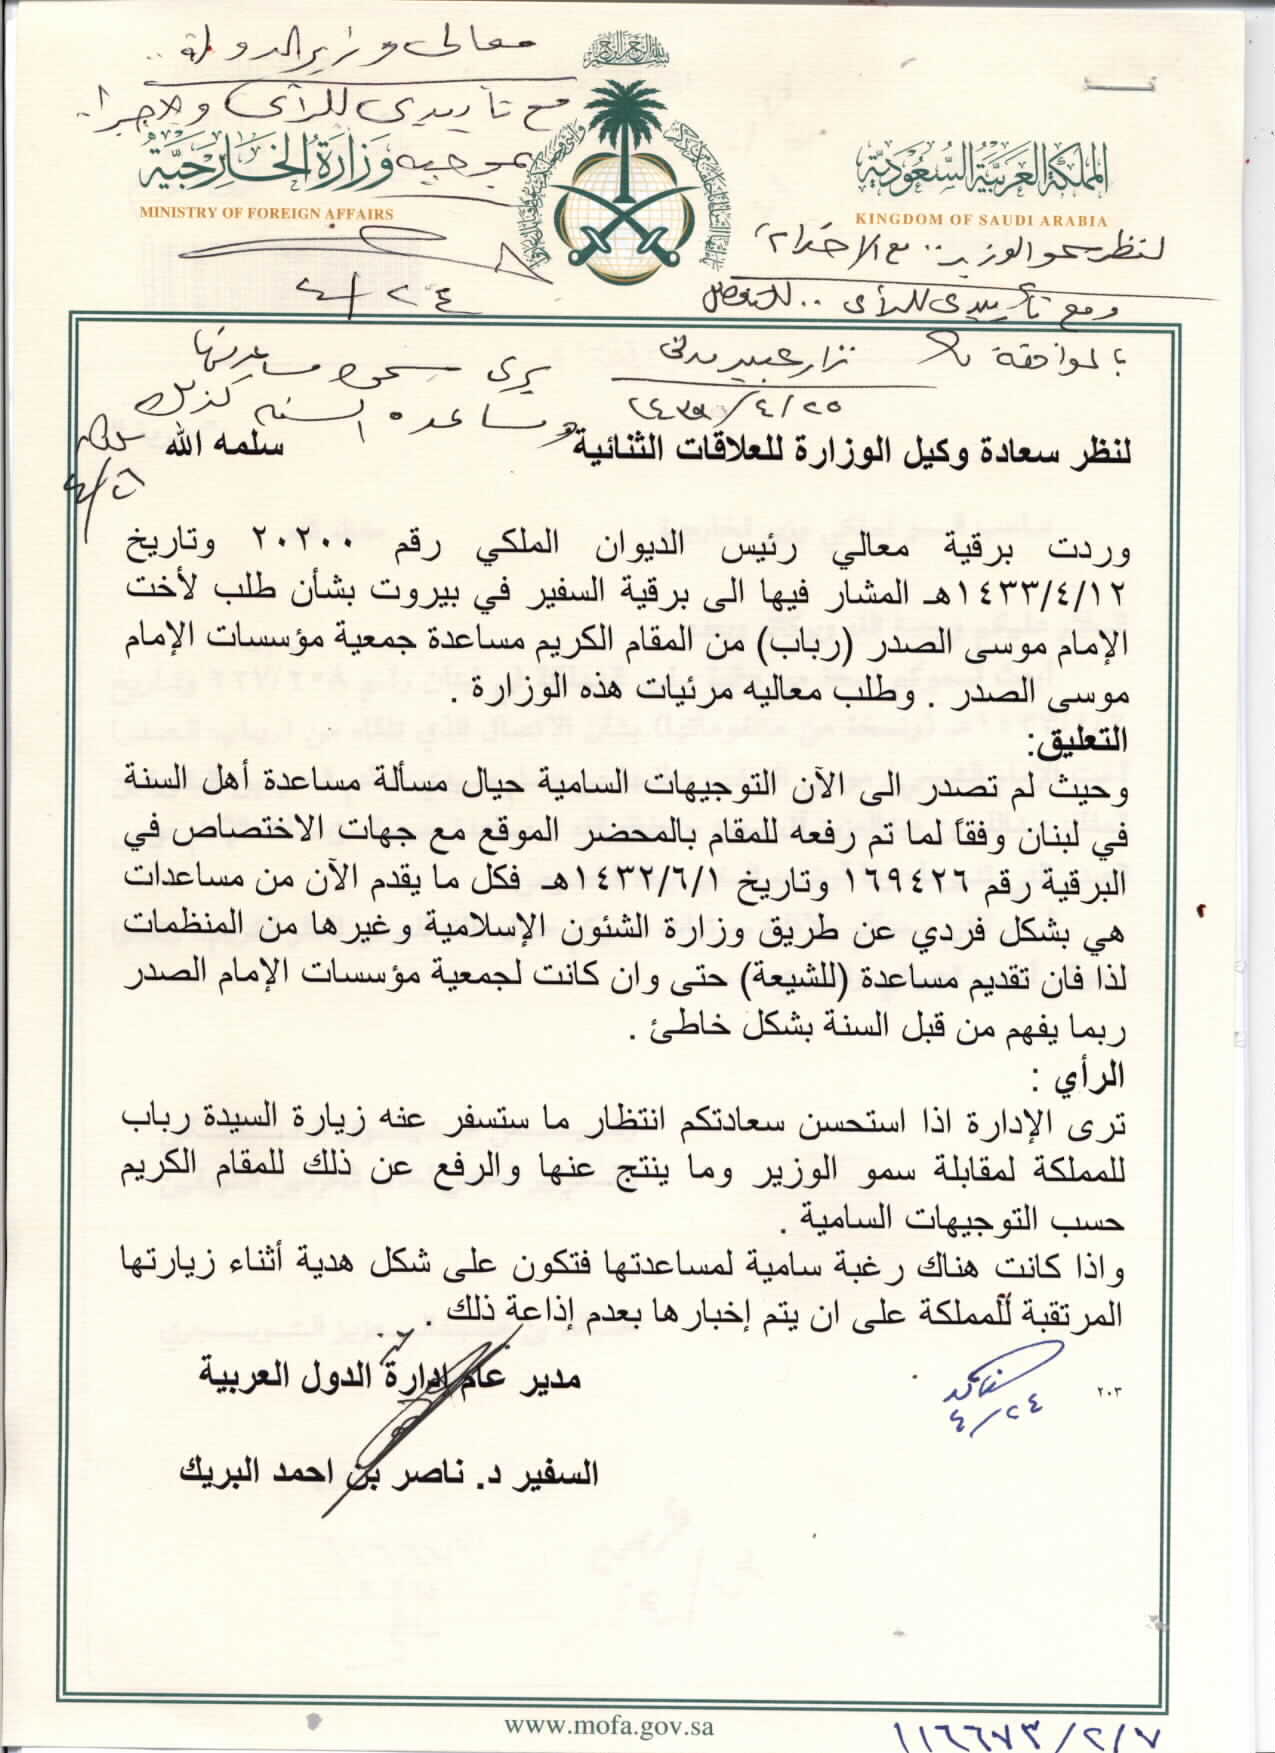 A letter that says that the Saudi Ambassador in Lebanon received a request from a shia figure for funds from Sadui